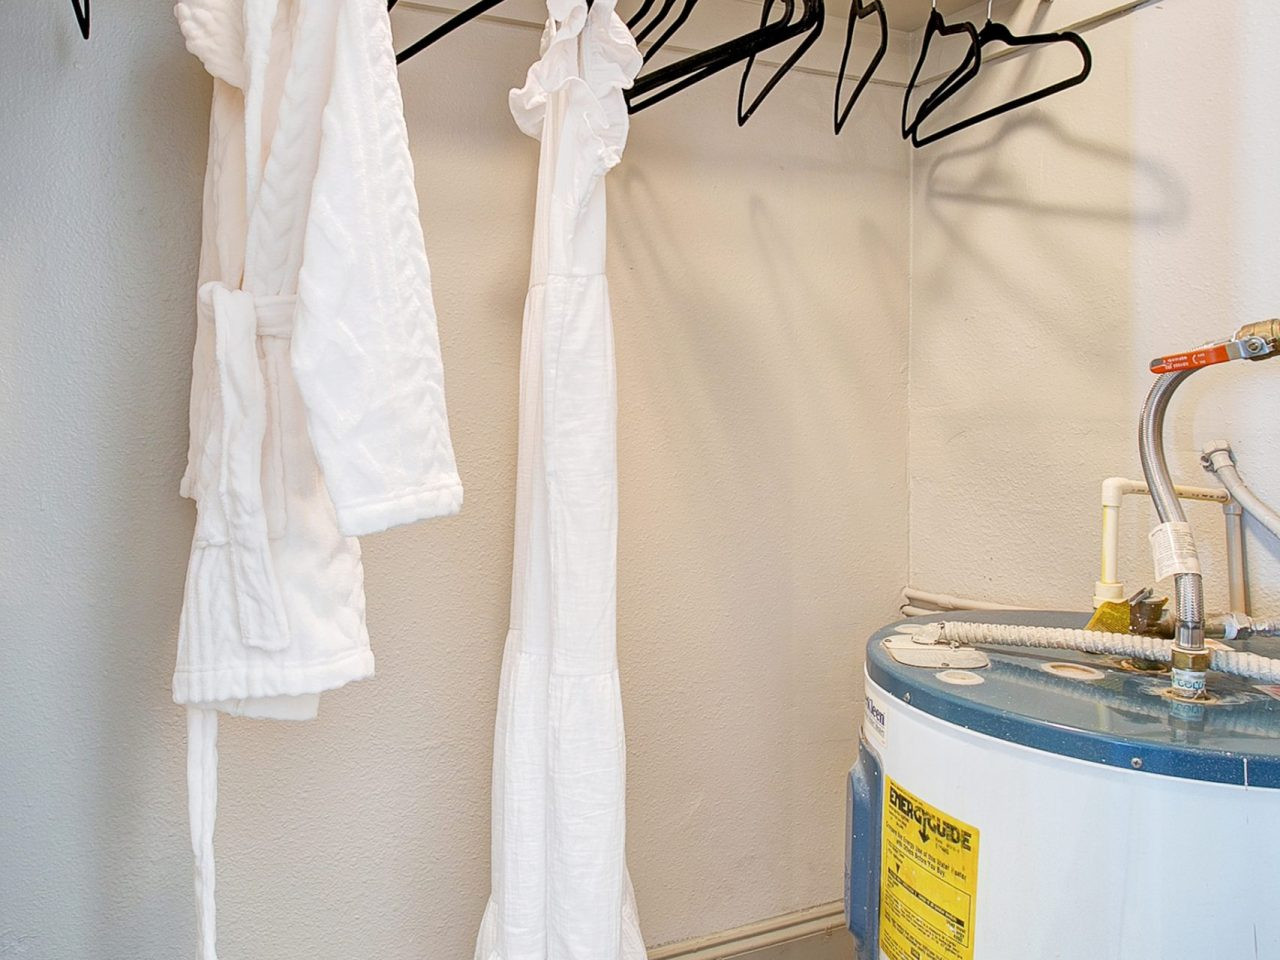 A walk-in closet with clothes hanging inside near a water heater unit.